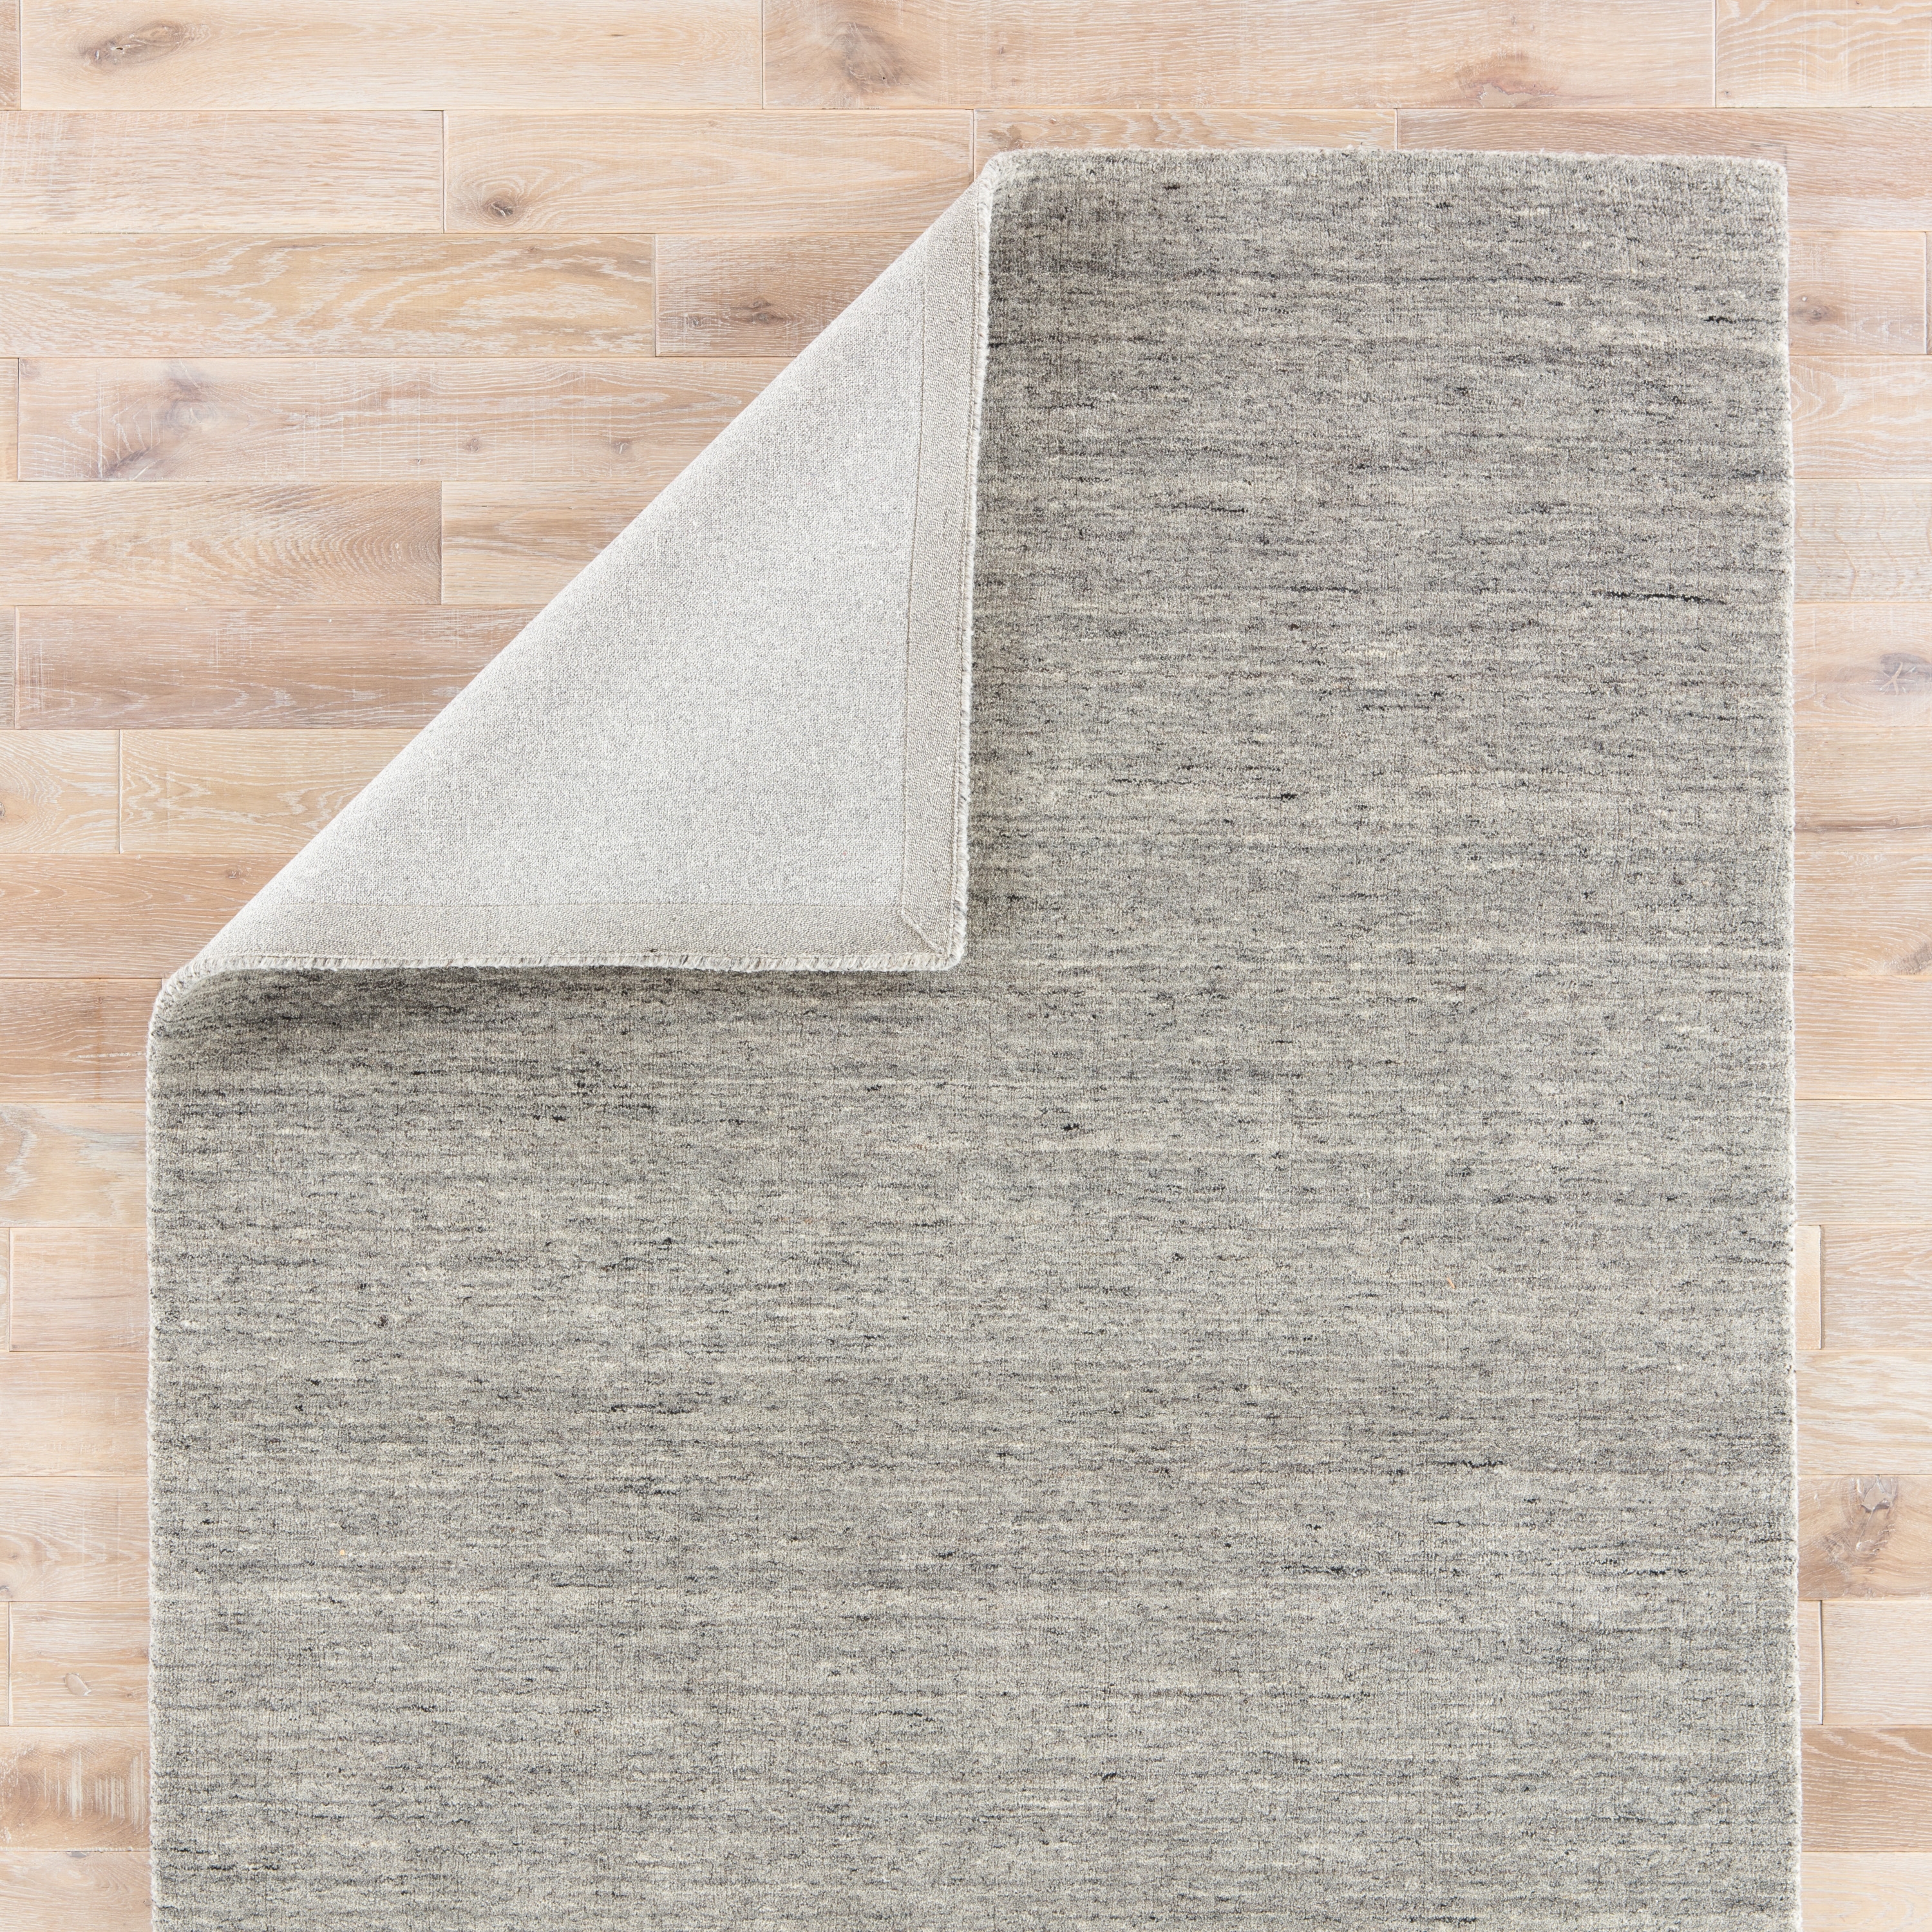 Elements Handmade Solid Gray/ Taupe Runner Rug (2'6" X 8') - Image 2